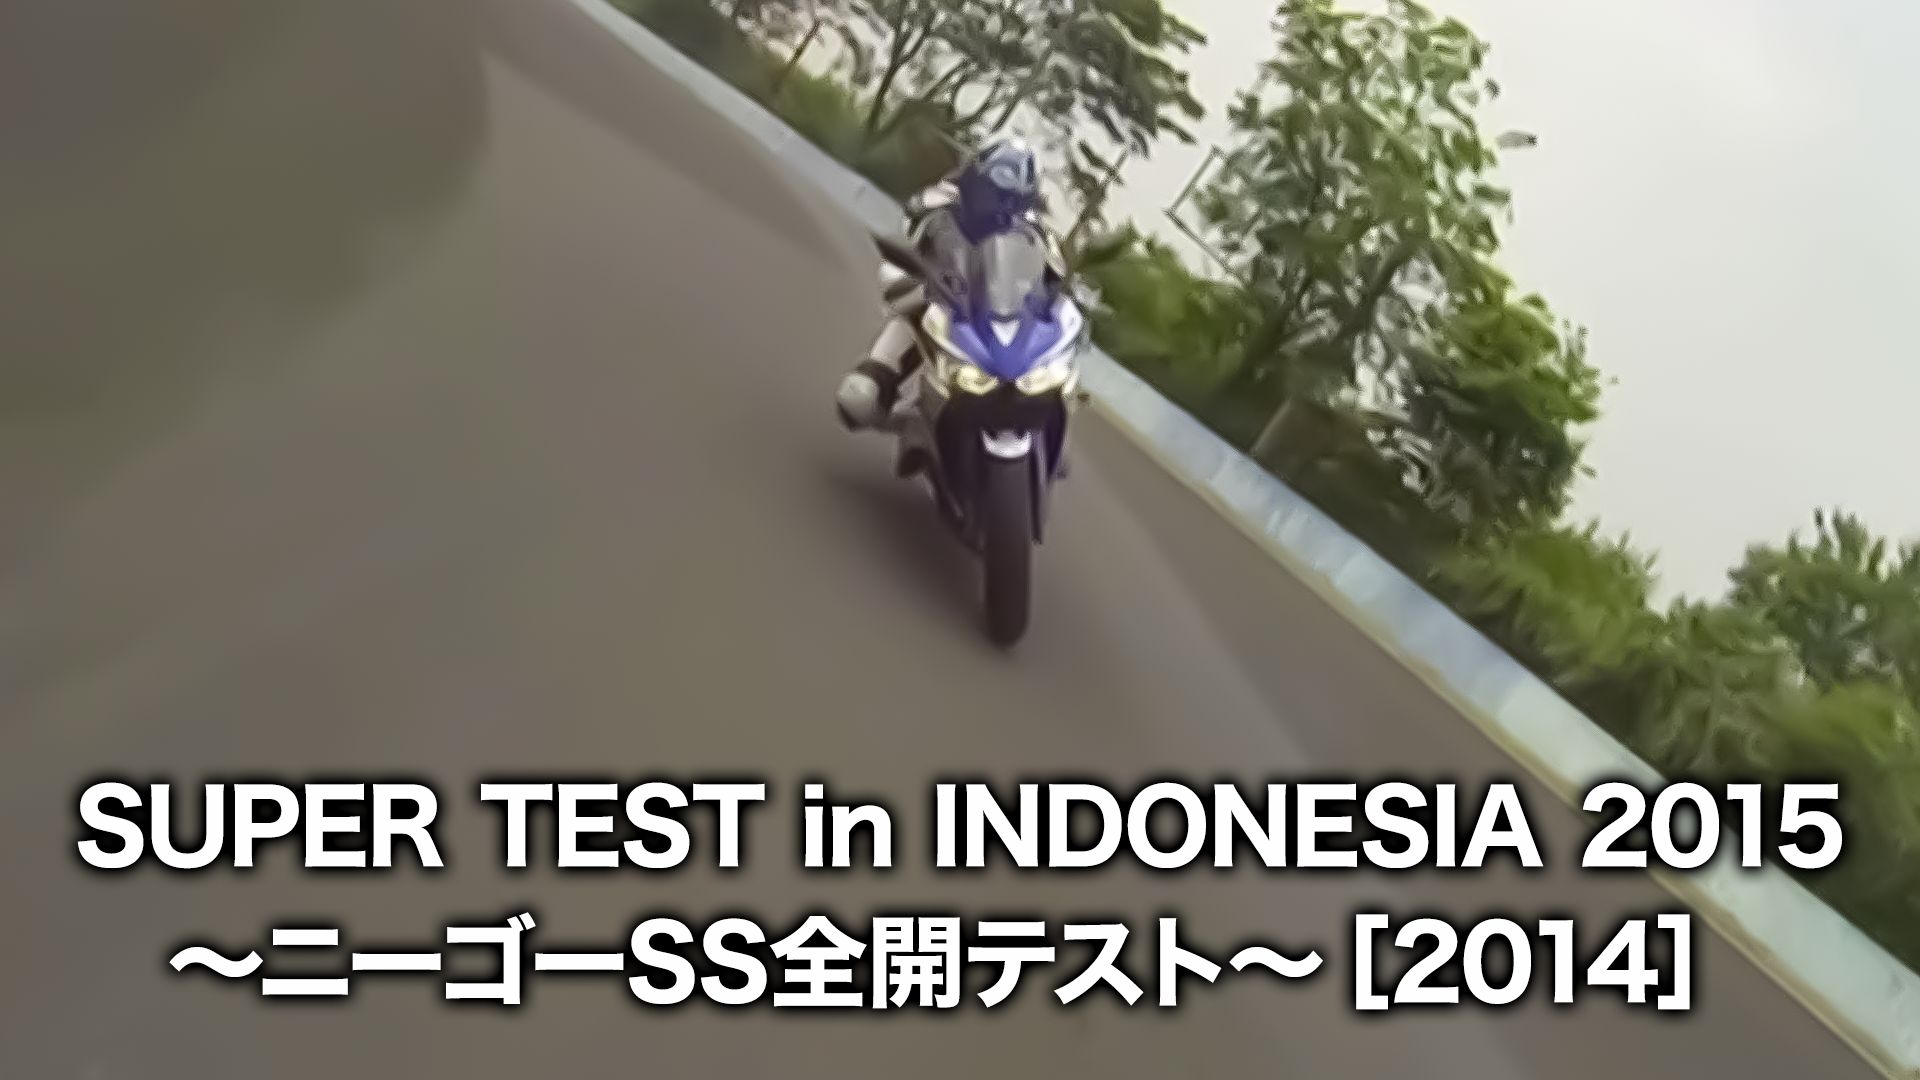 SUPER TEST in INDONESIA 2015 〜ニーゴーSS全開テスト〜 2014